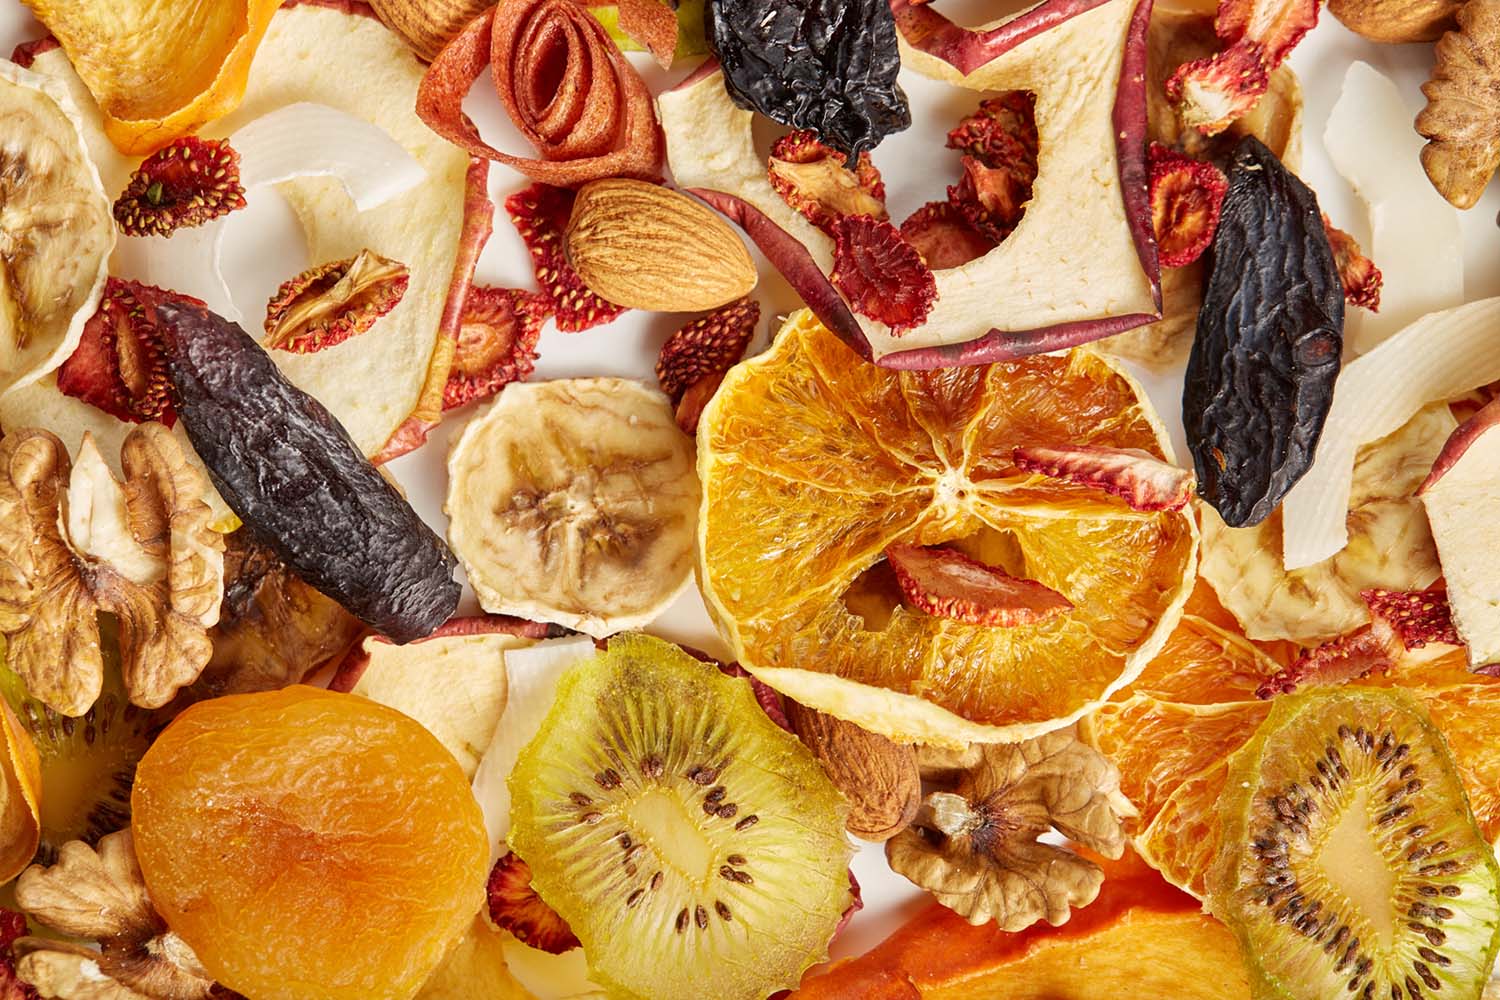 https://recipes.net/wp-content/uploads/2024/01/how-to-dehydrate-fruits-without-a-dehydrator-1704643616.jpg